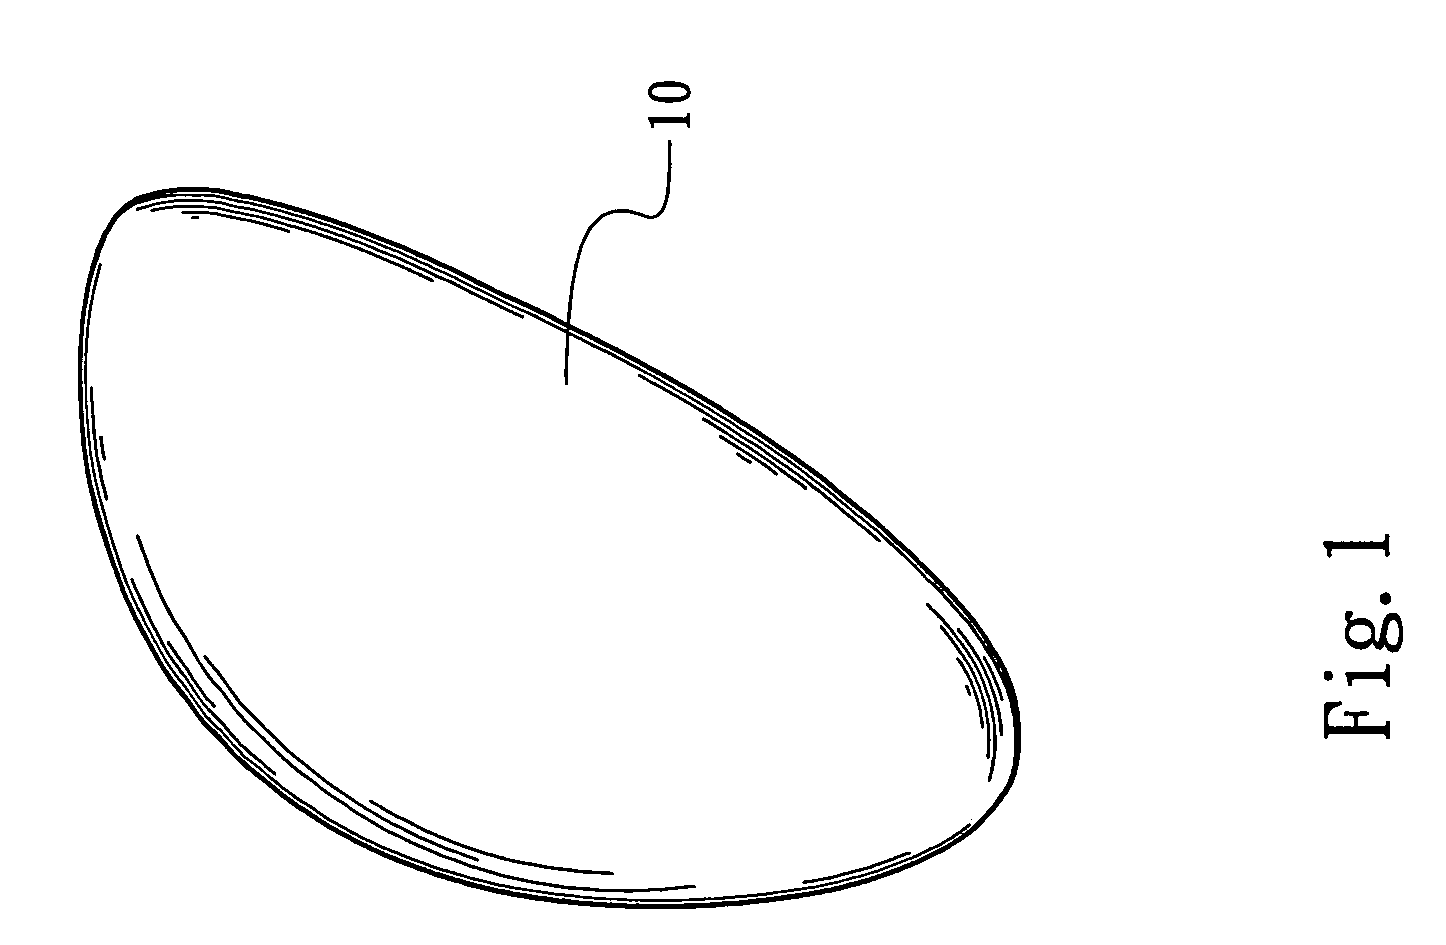 Brassiere pad (cup) structure having negative electromagnetic energy